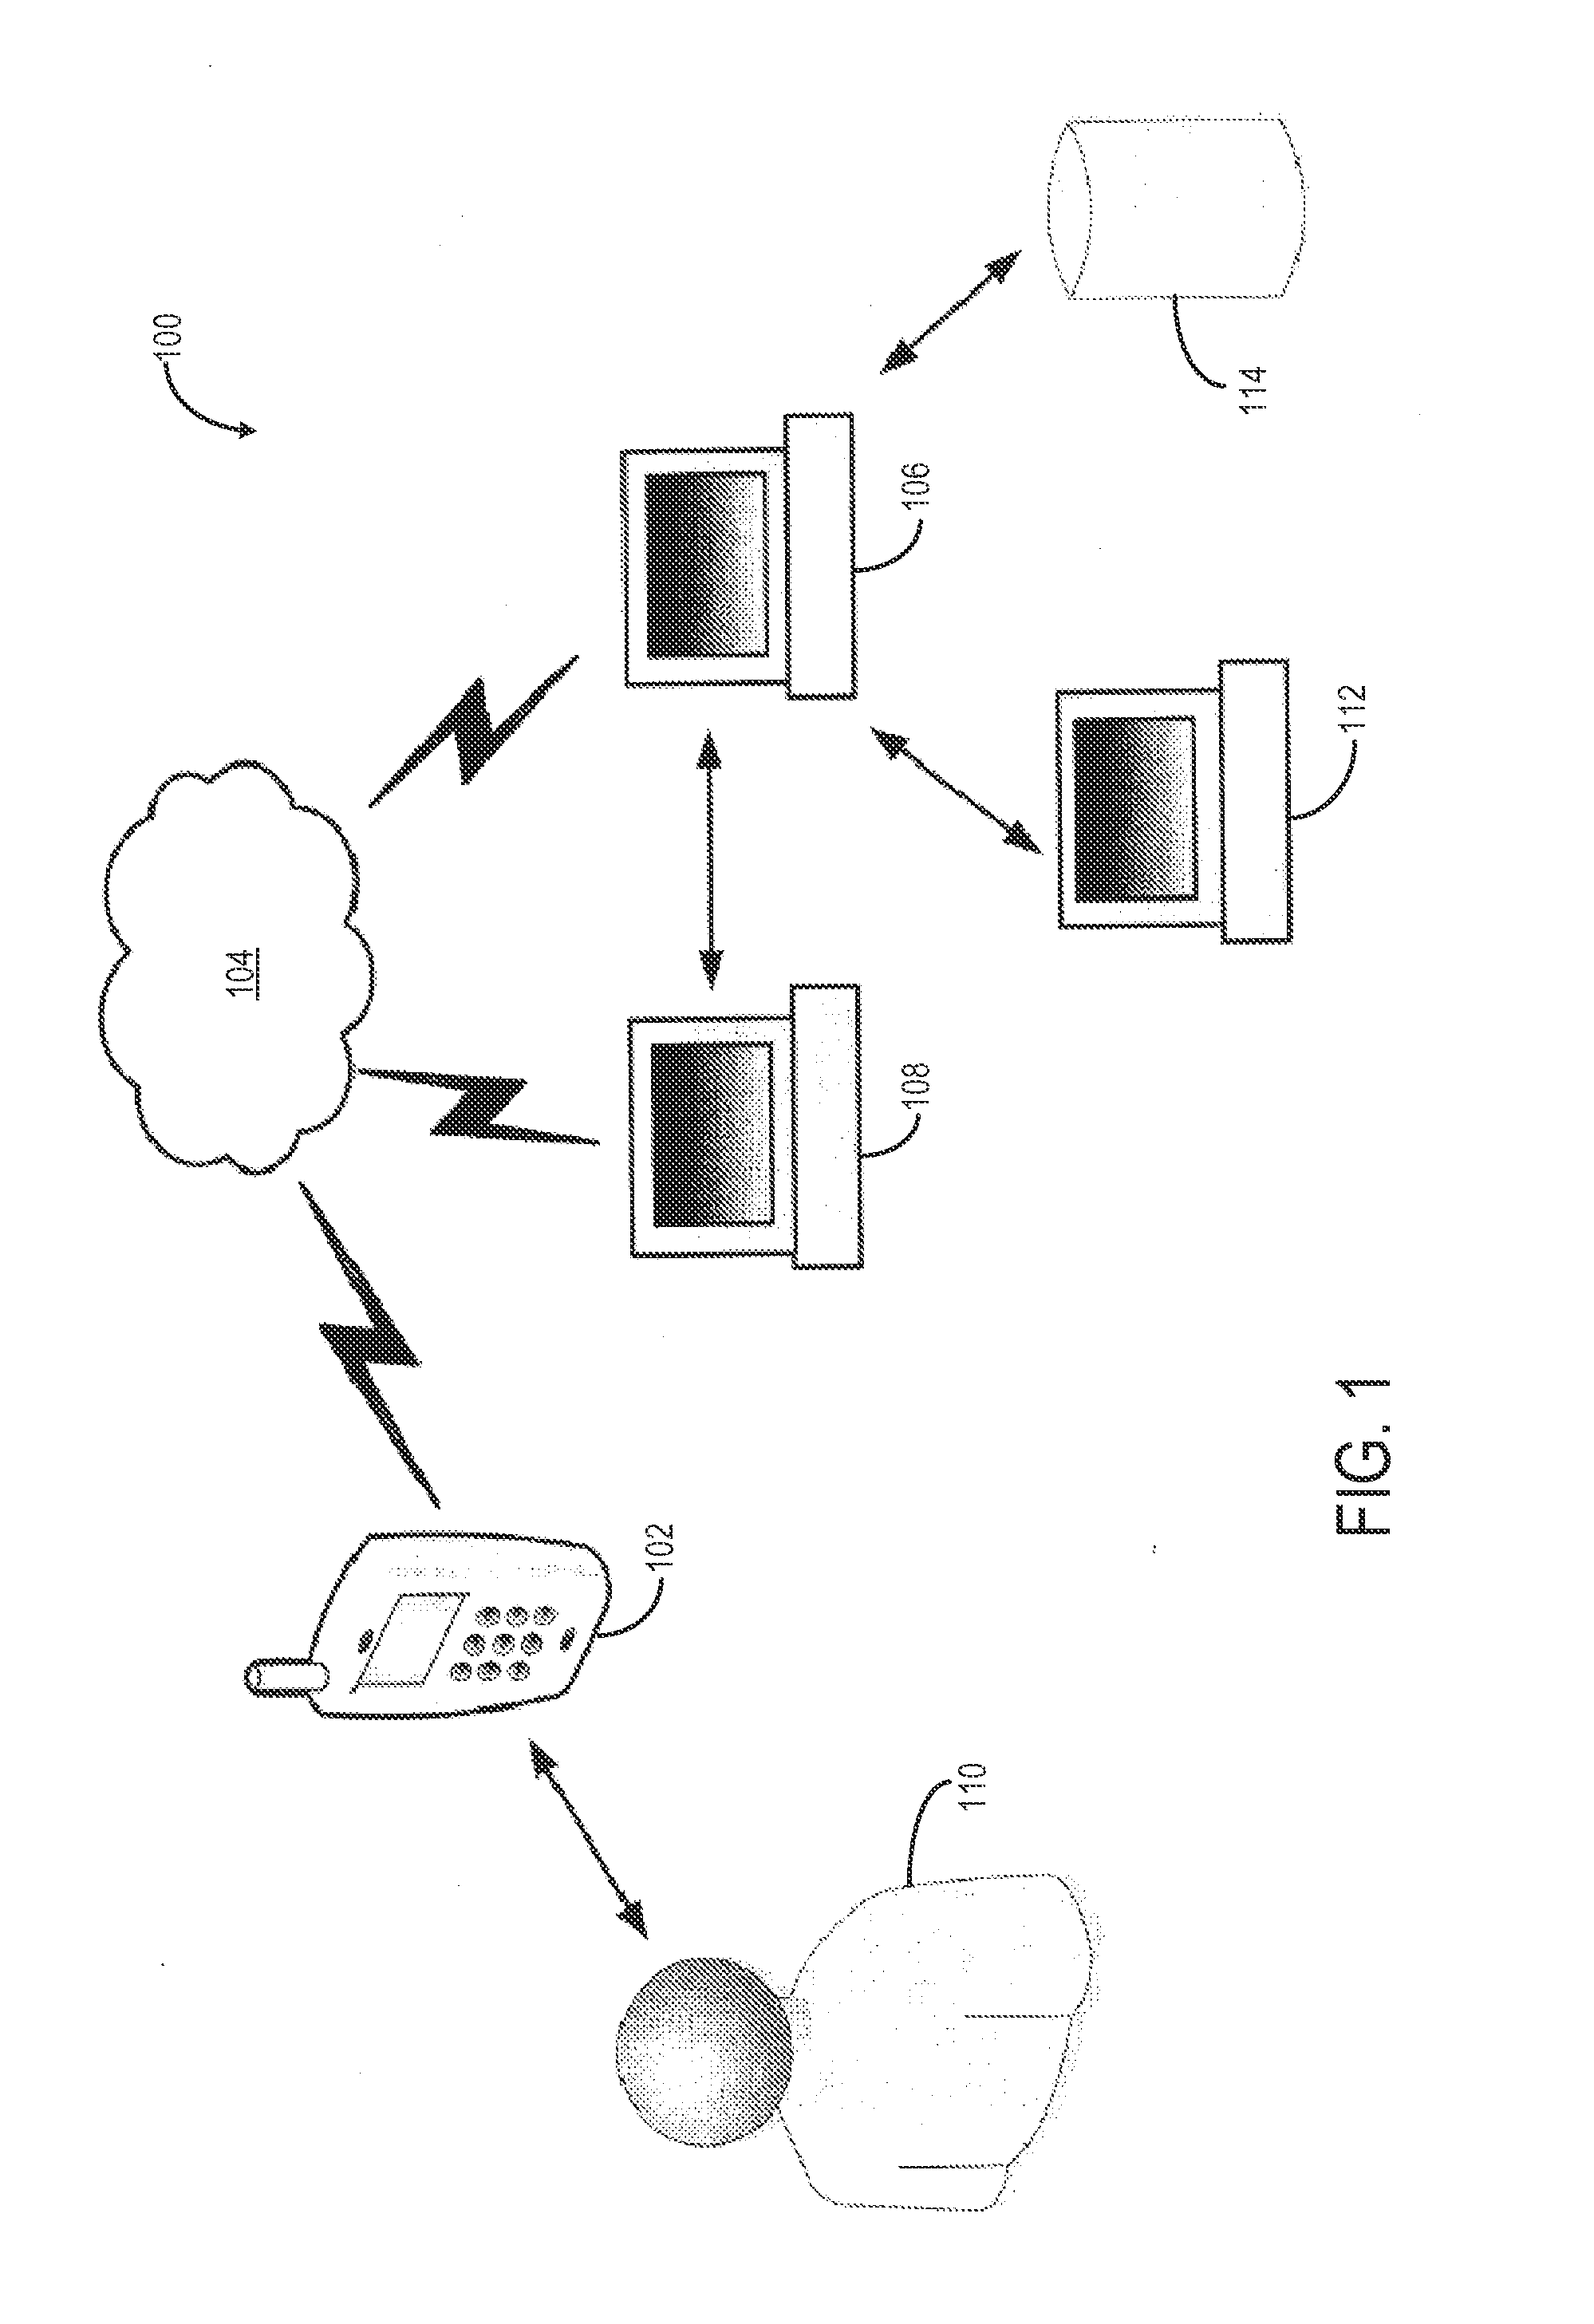 System and method for automated dosage calculation and patient treatment life cycle